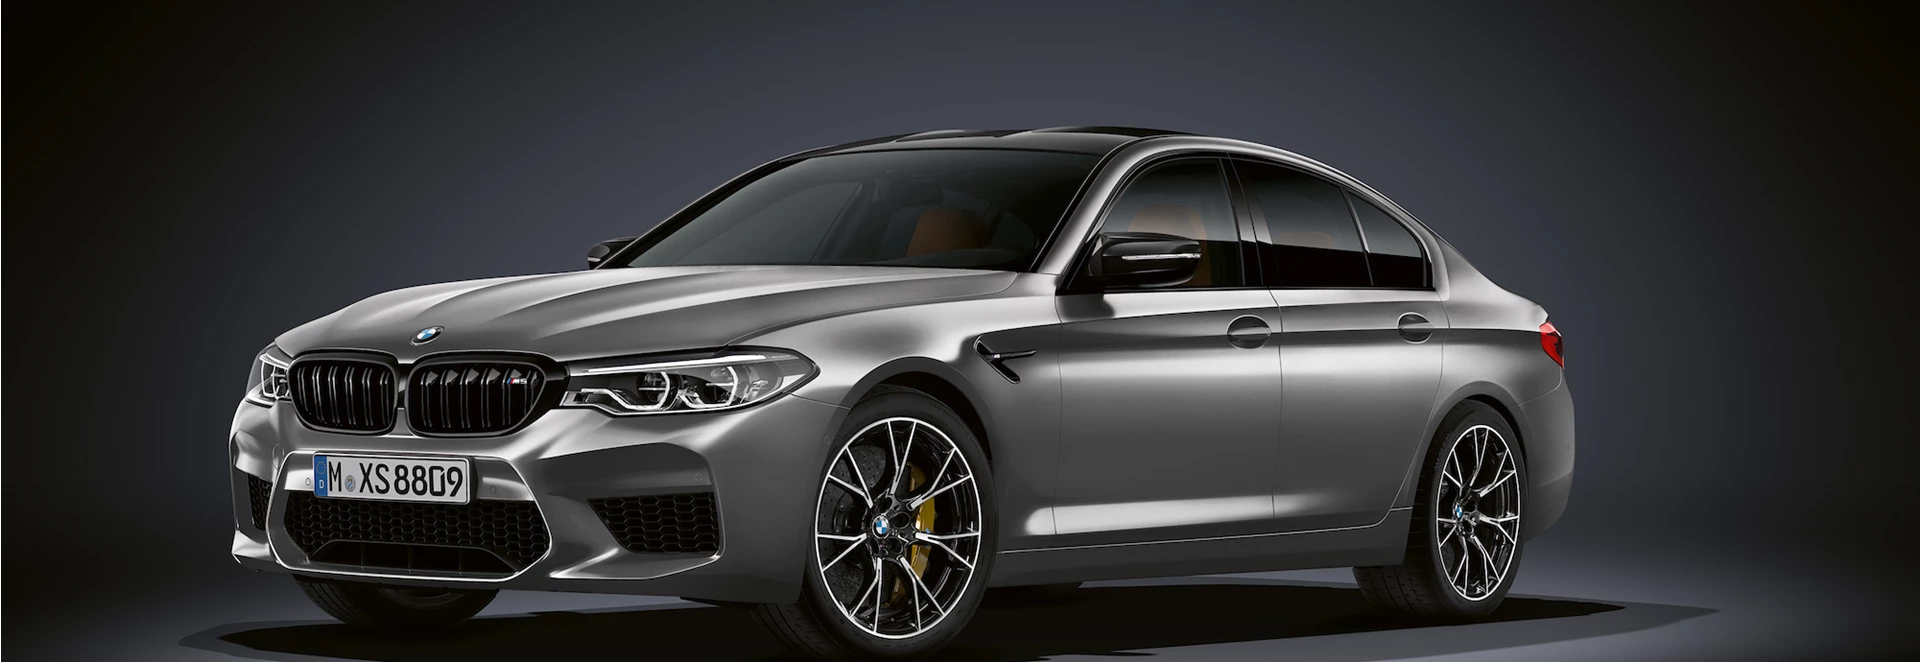 616bhp BMW M5 Competition revealed